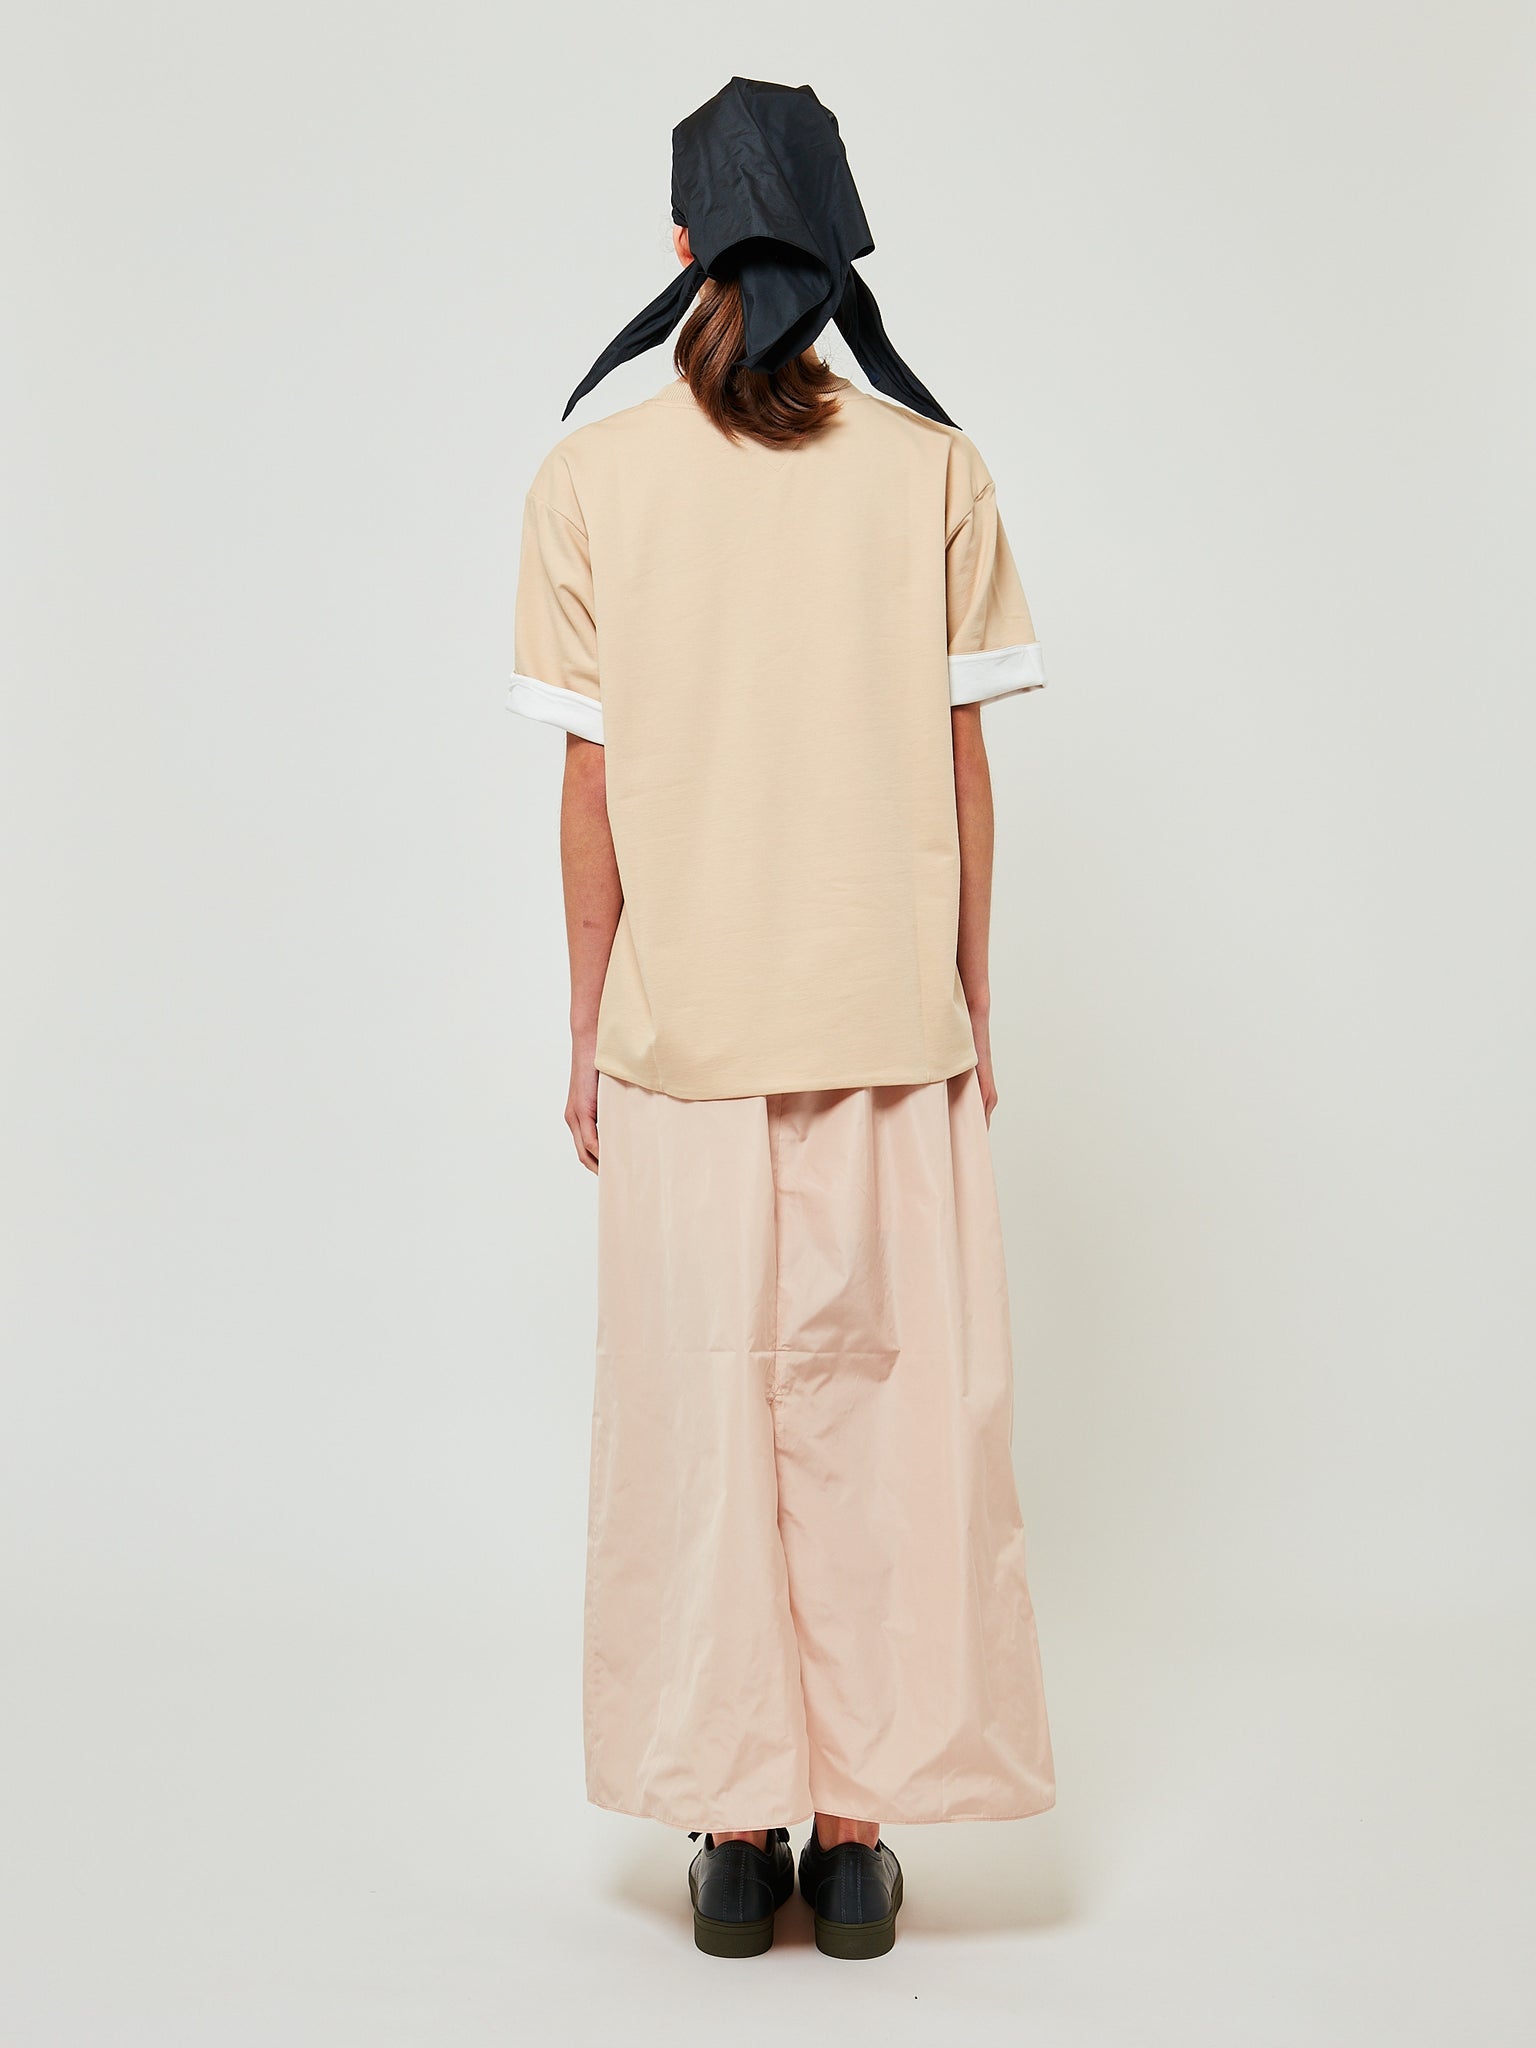 Teo T-Shirt Nude OffWhite